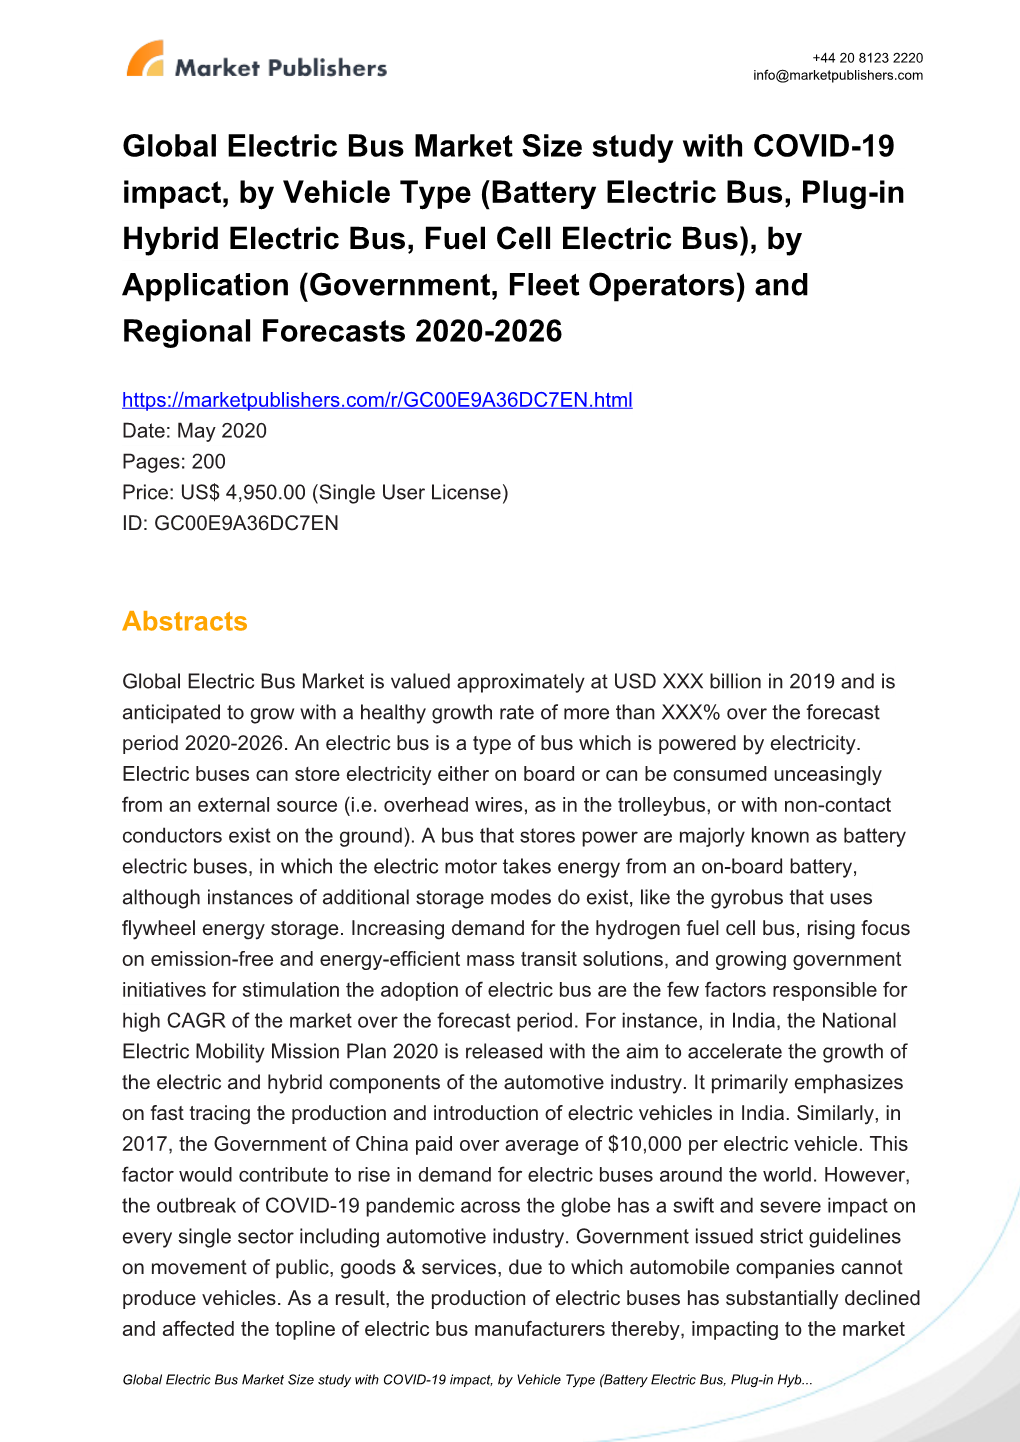 Global Electric Bus Market Size Study With